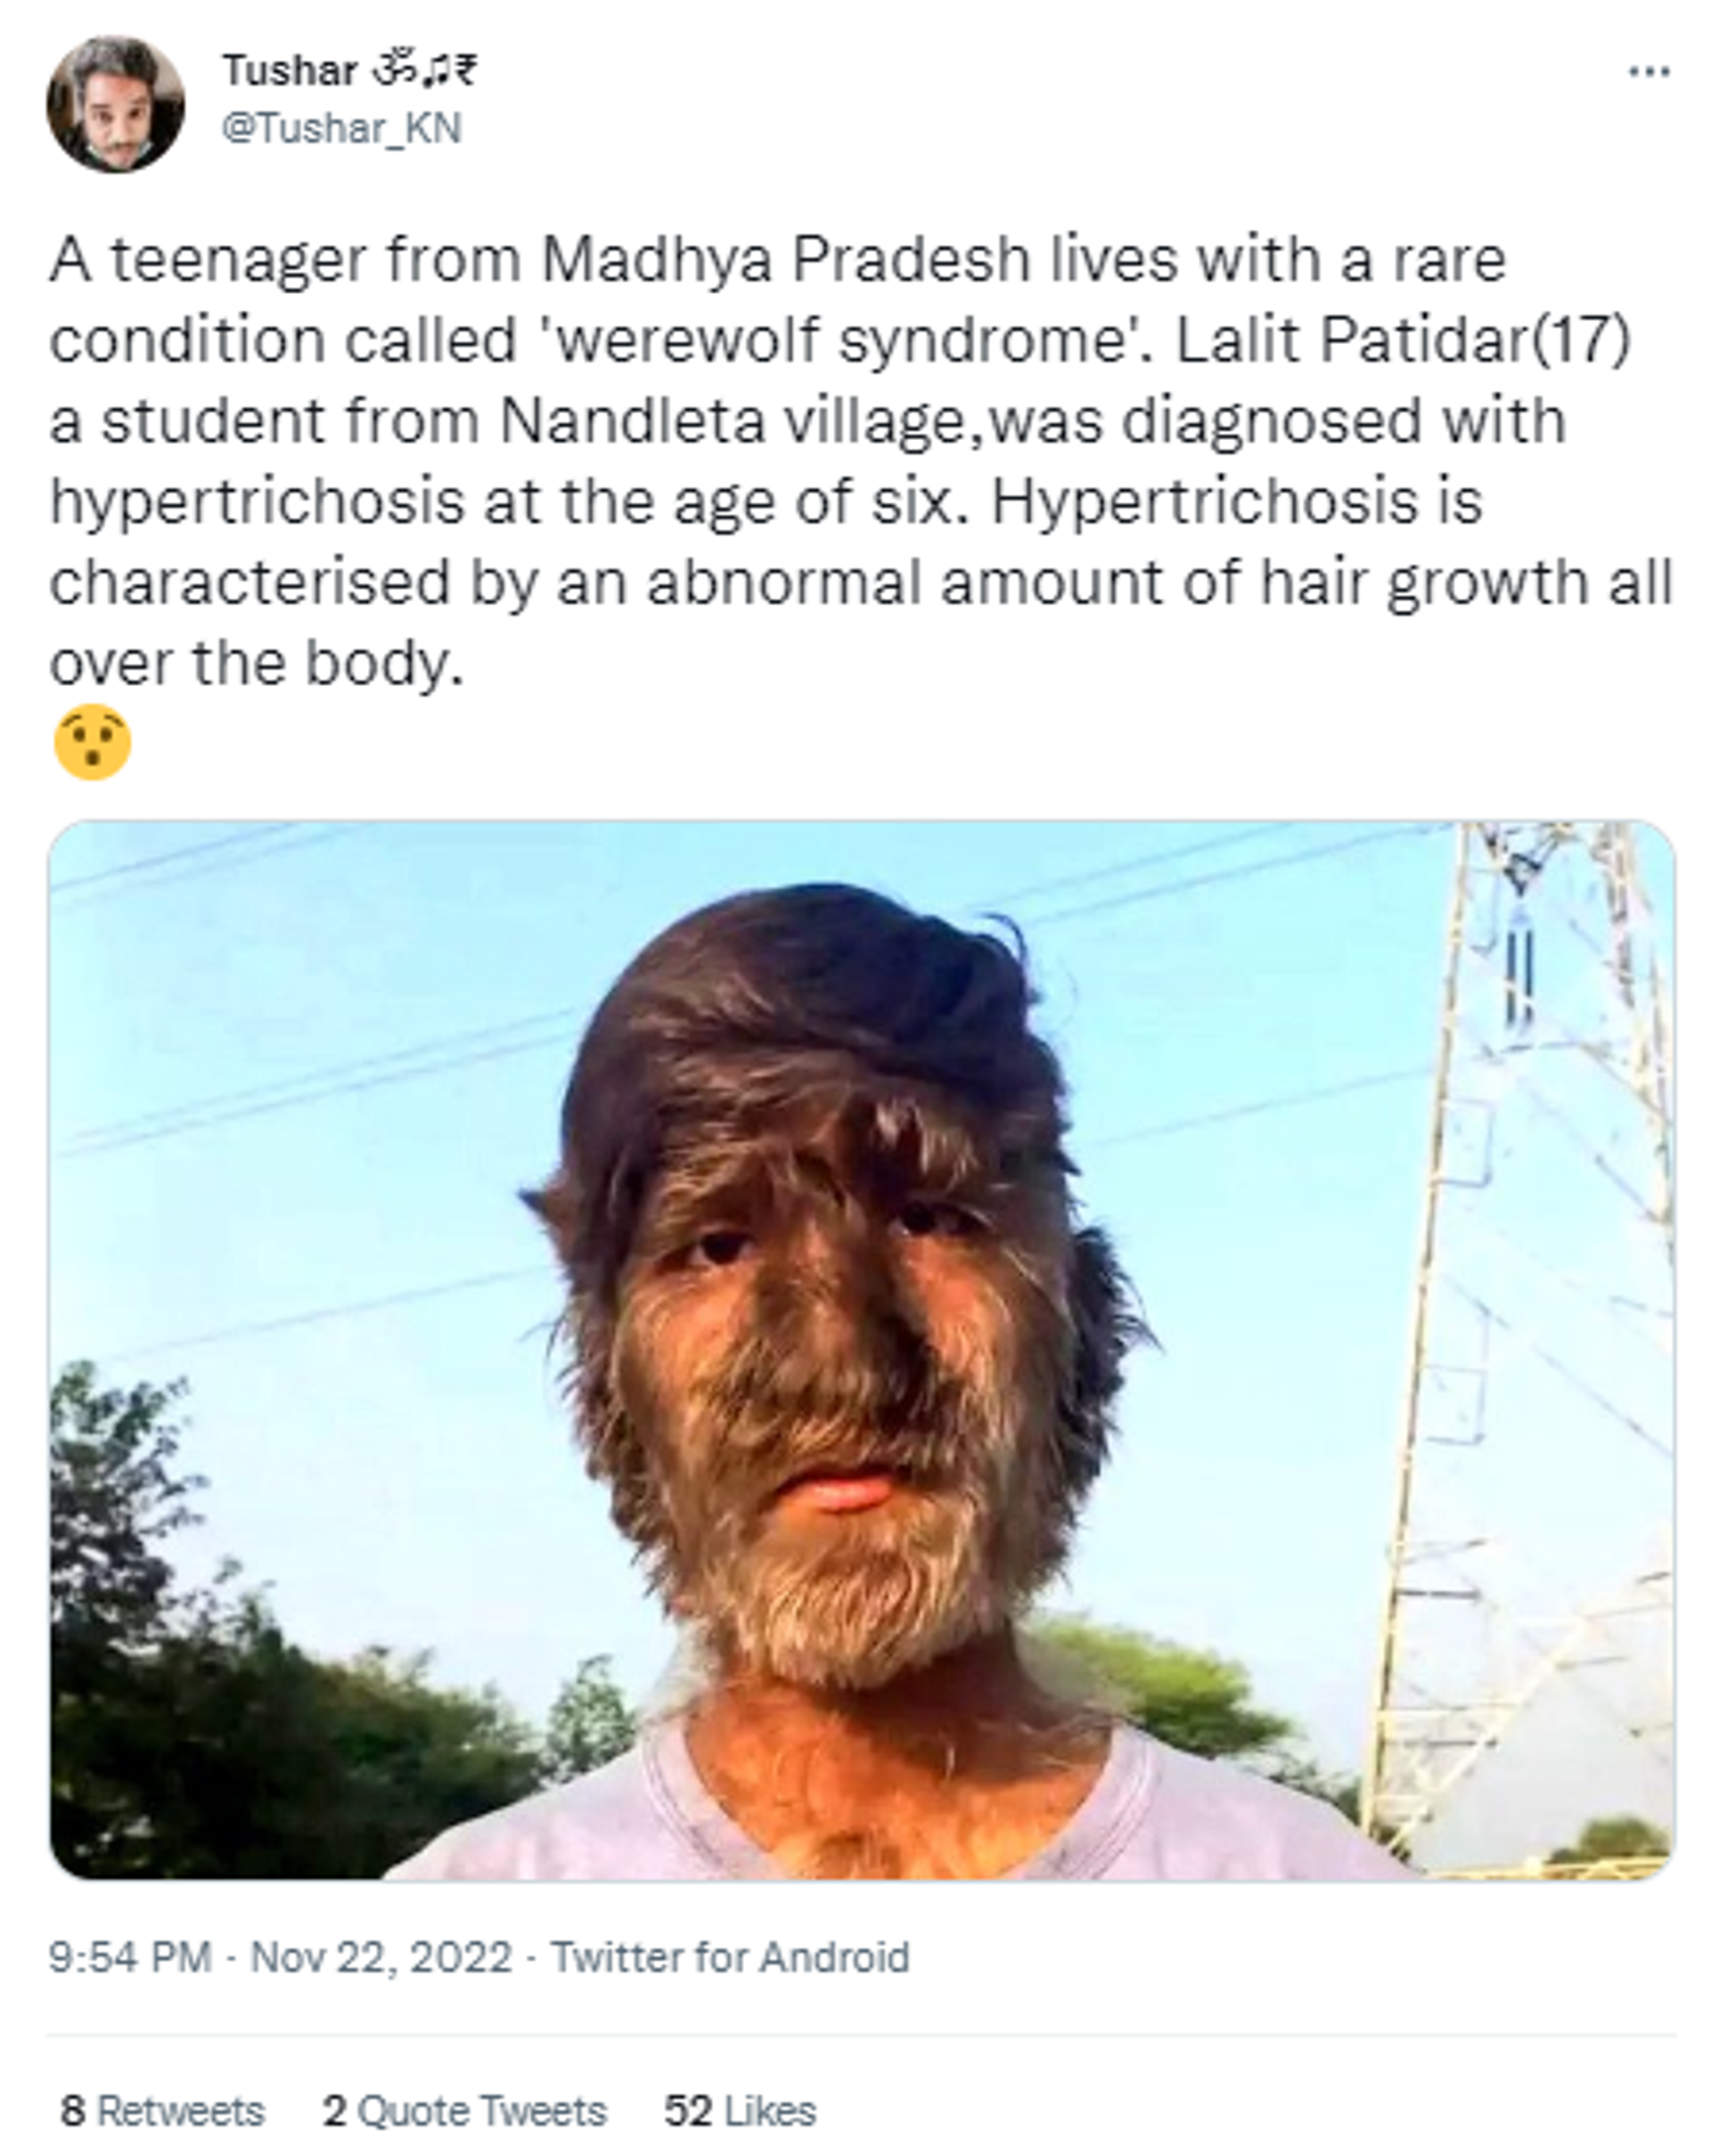 17-year-old boy, Lalit Patidar, from India's Madhya Pradesh state diagnosed with a rare disorder - Werewolf Syndrome - Sputnik International, 1920, 23.11.2022